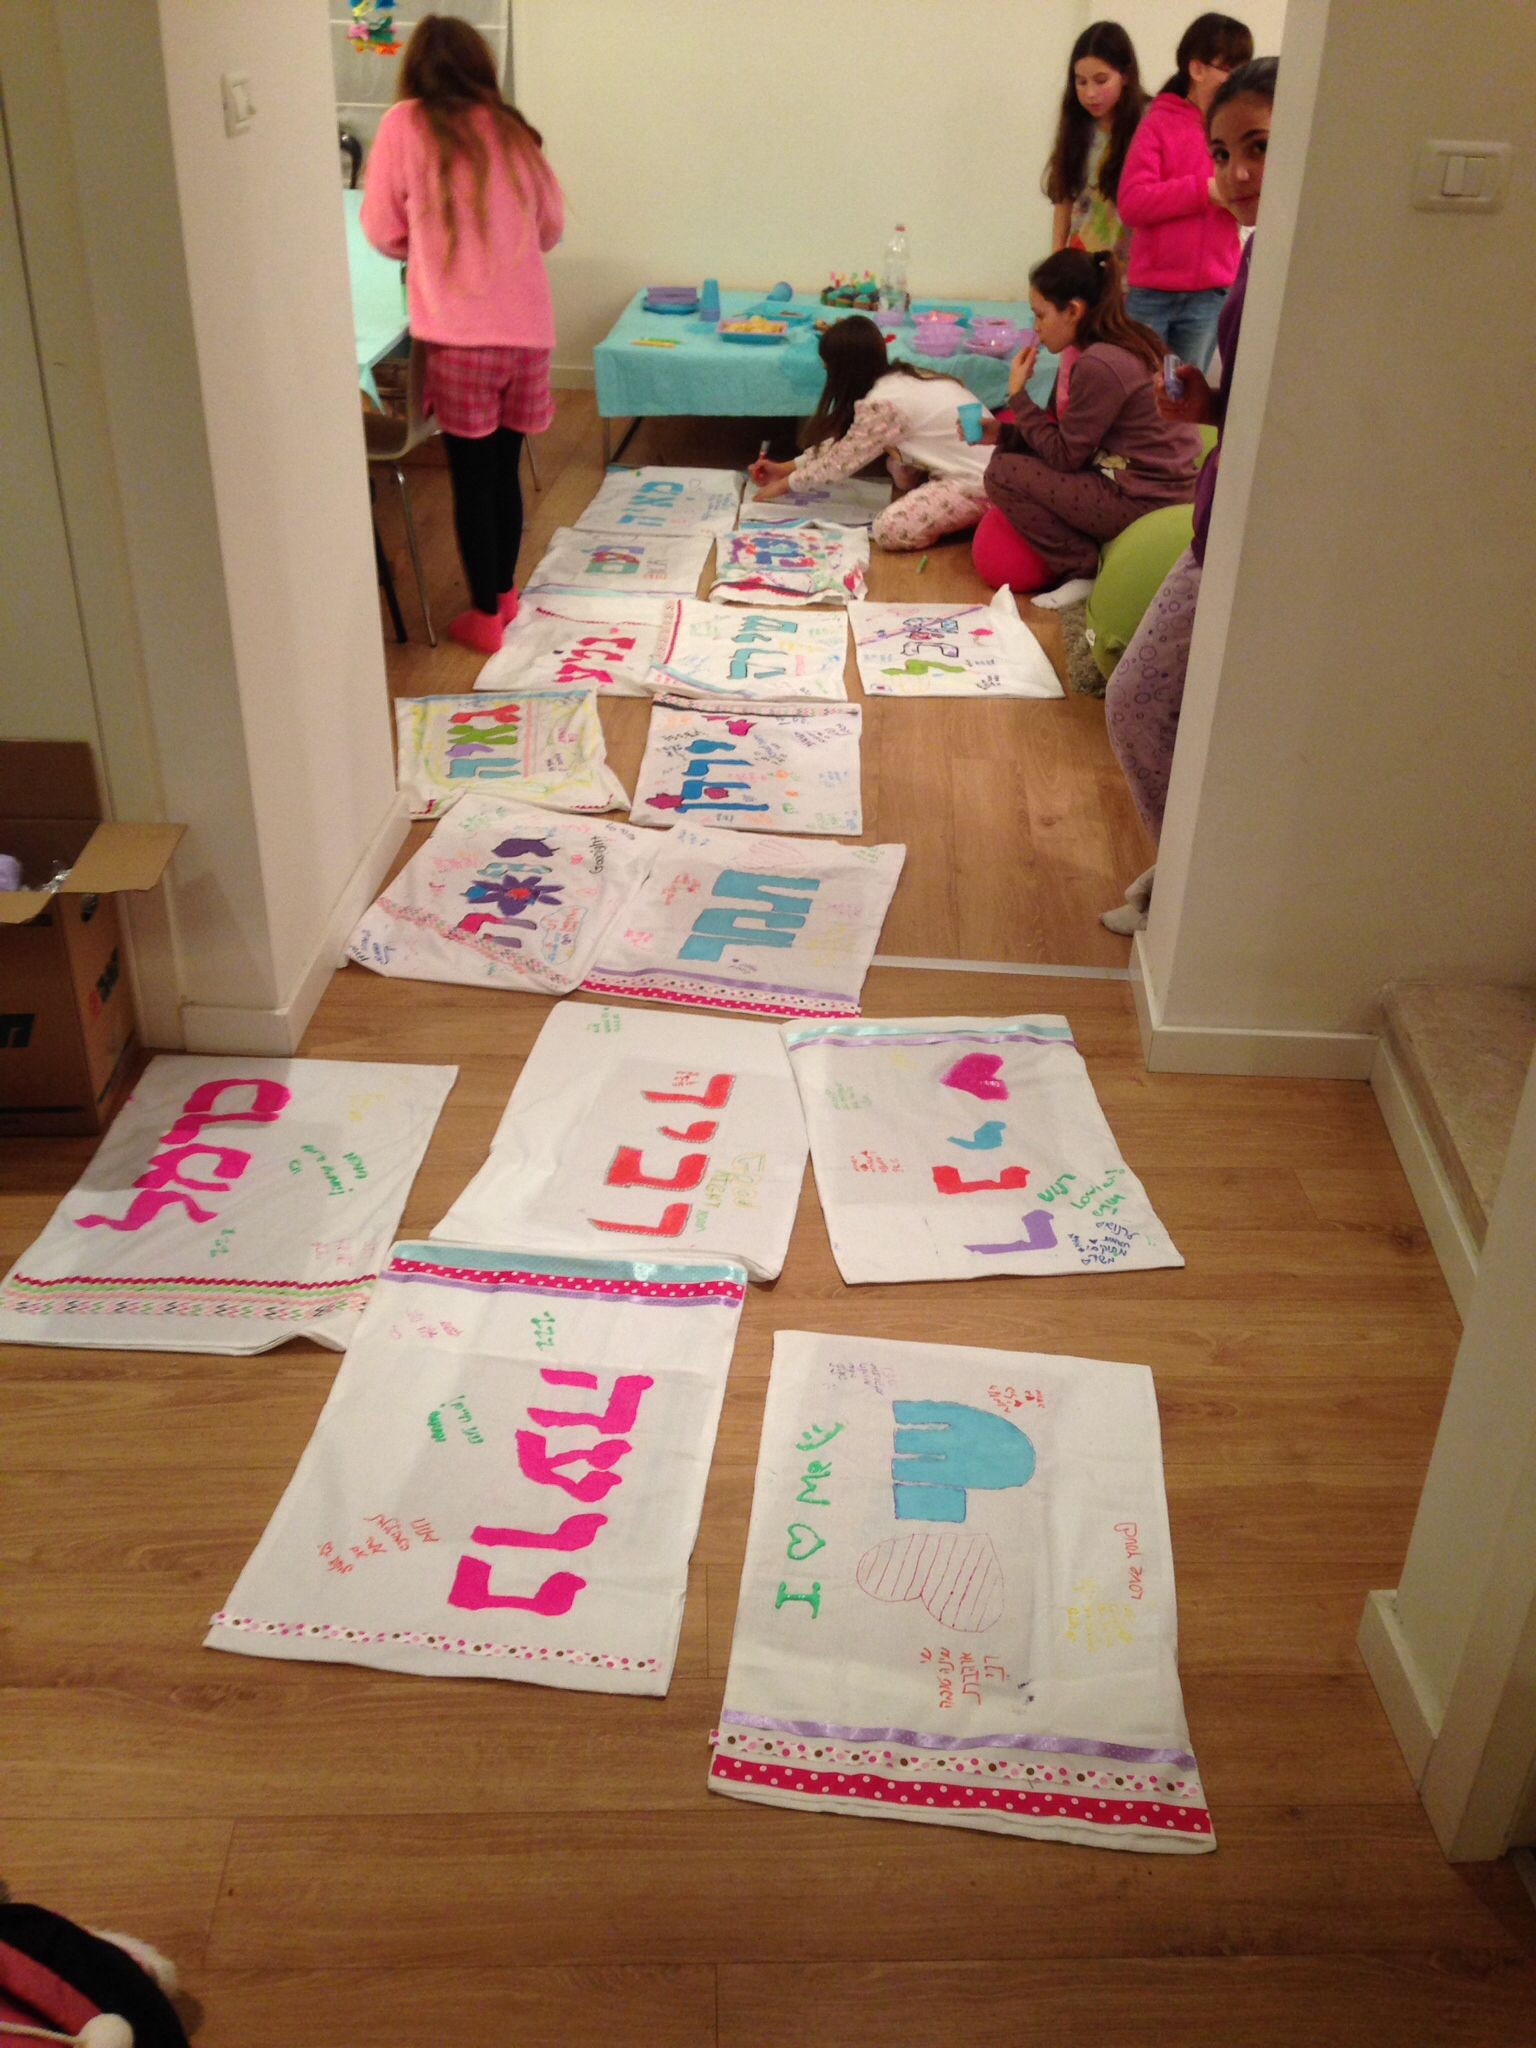 Birthday Party Ideas For 11 Yr Old Girl
 Pillowcase crafts at 11 year old s pyjama party